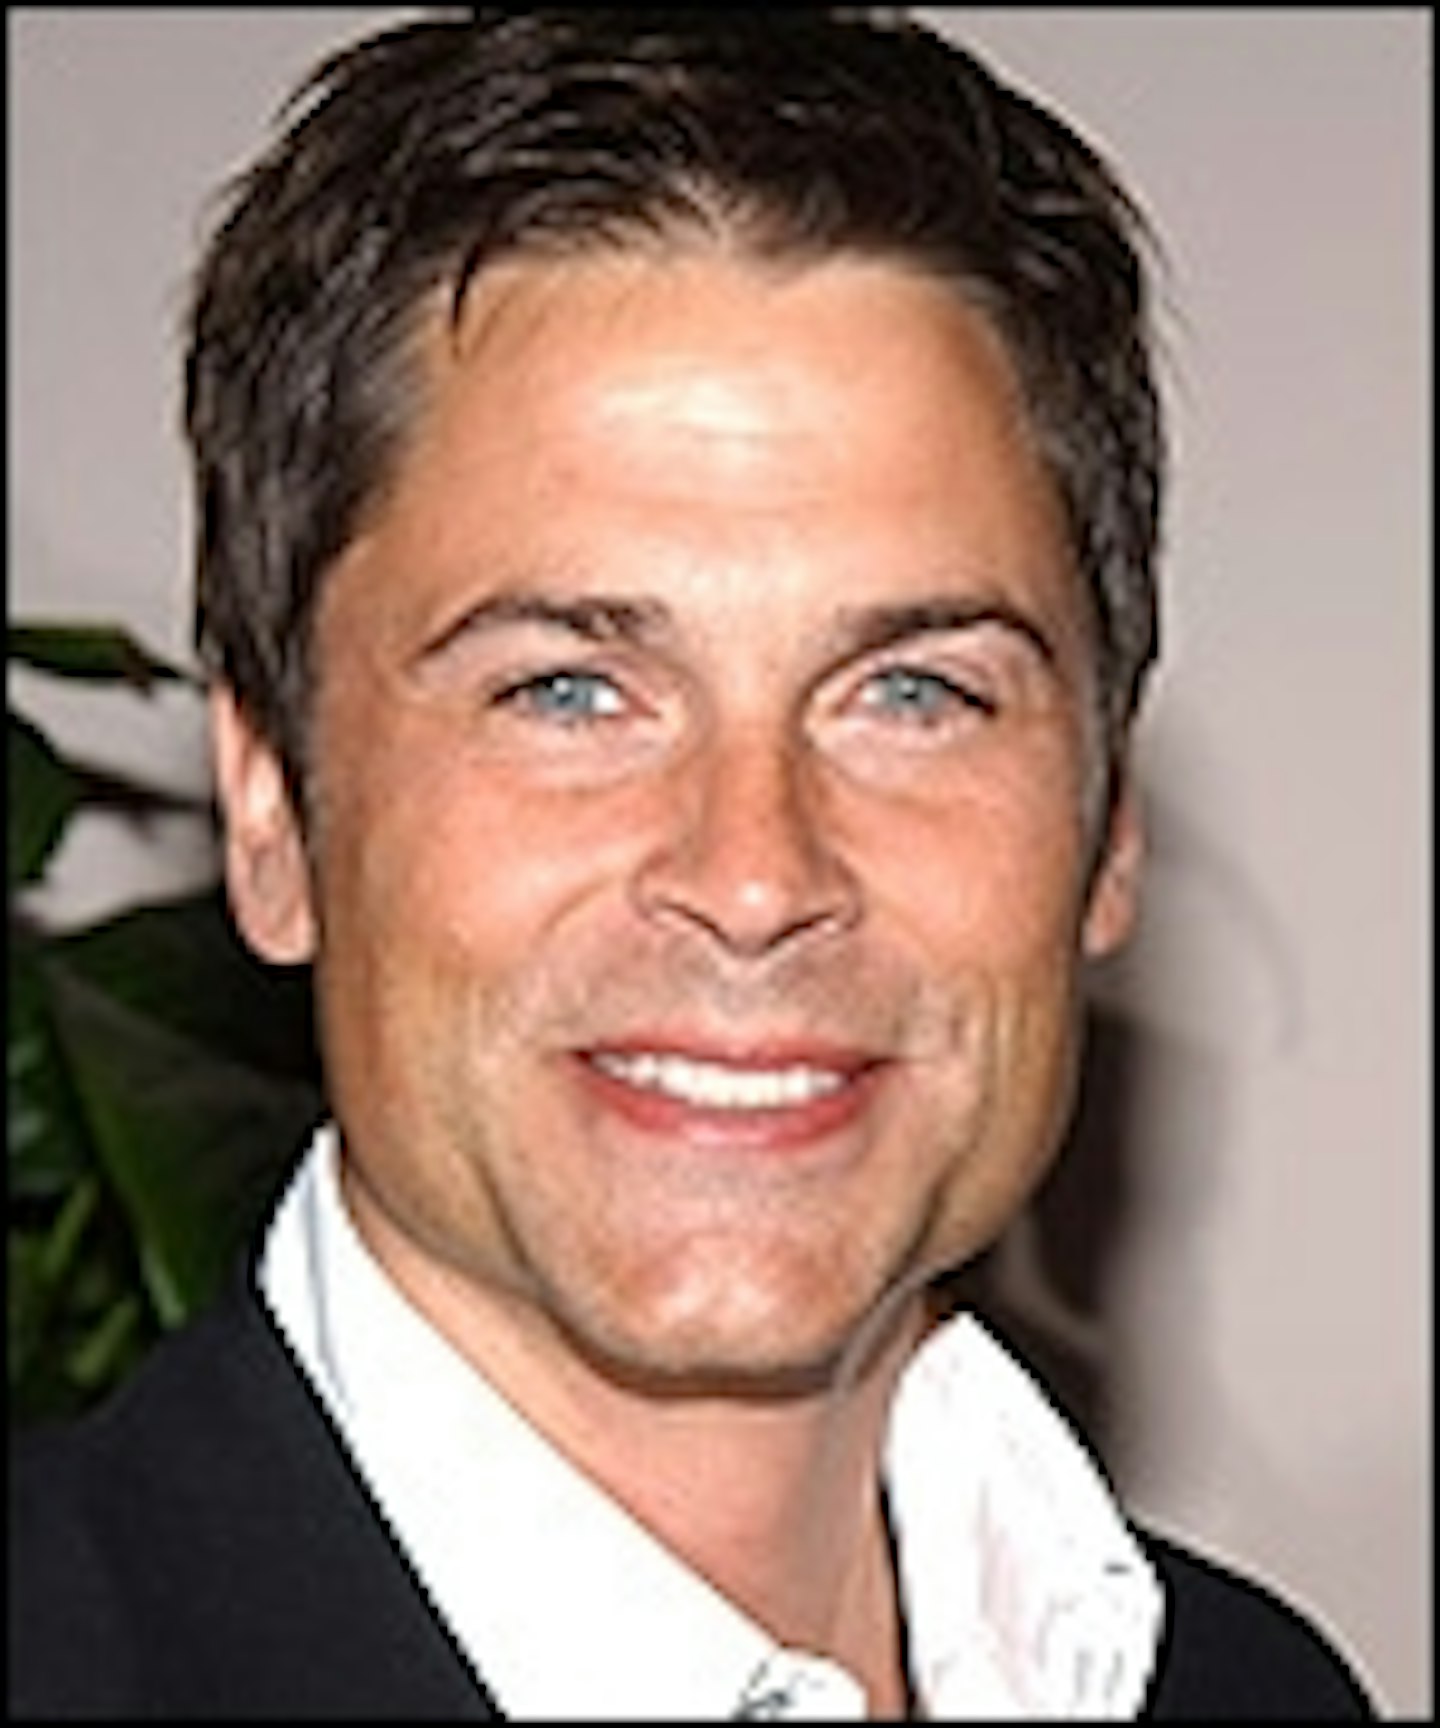 Rob Lowe Goes Behind The Candelabra